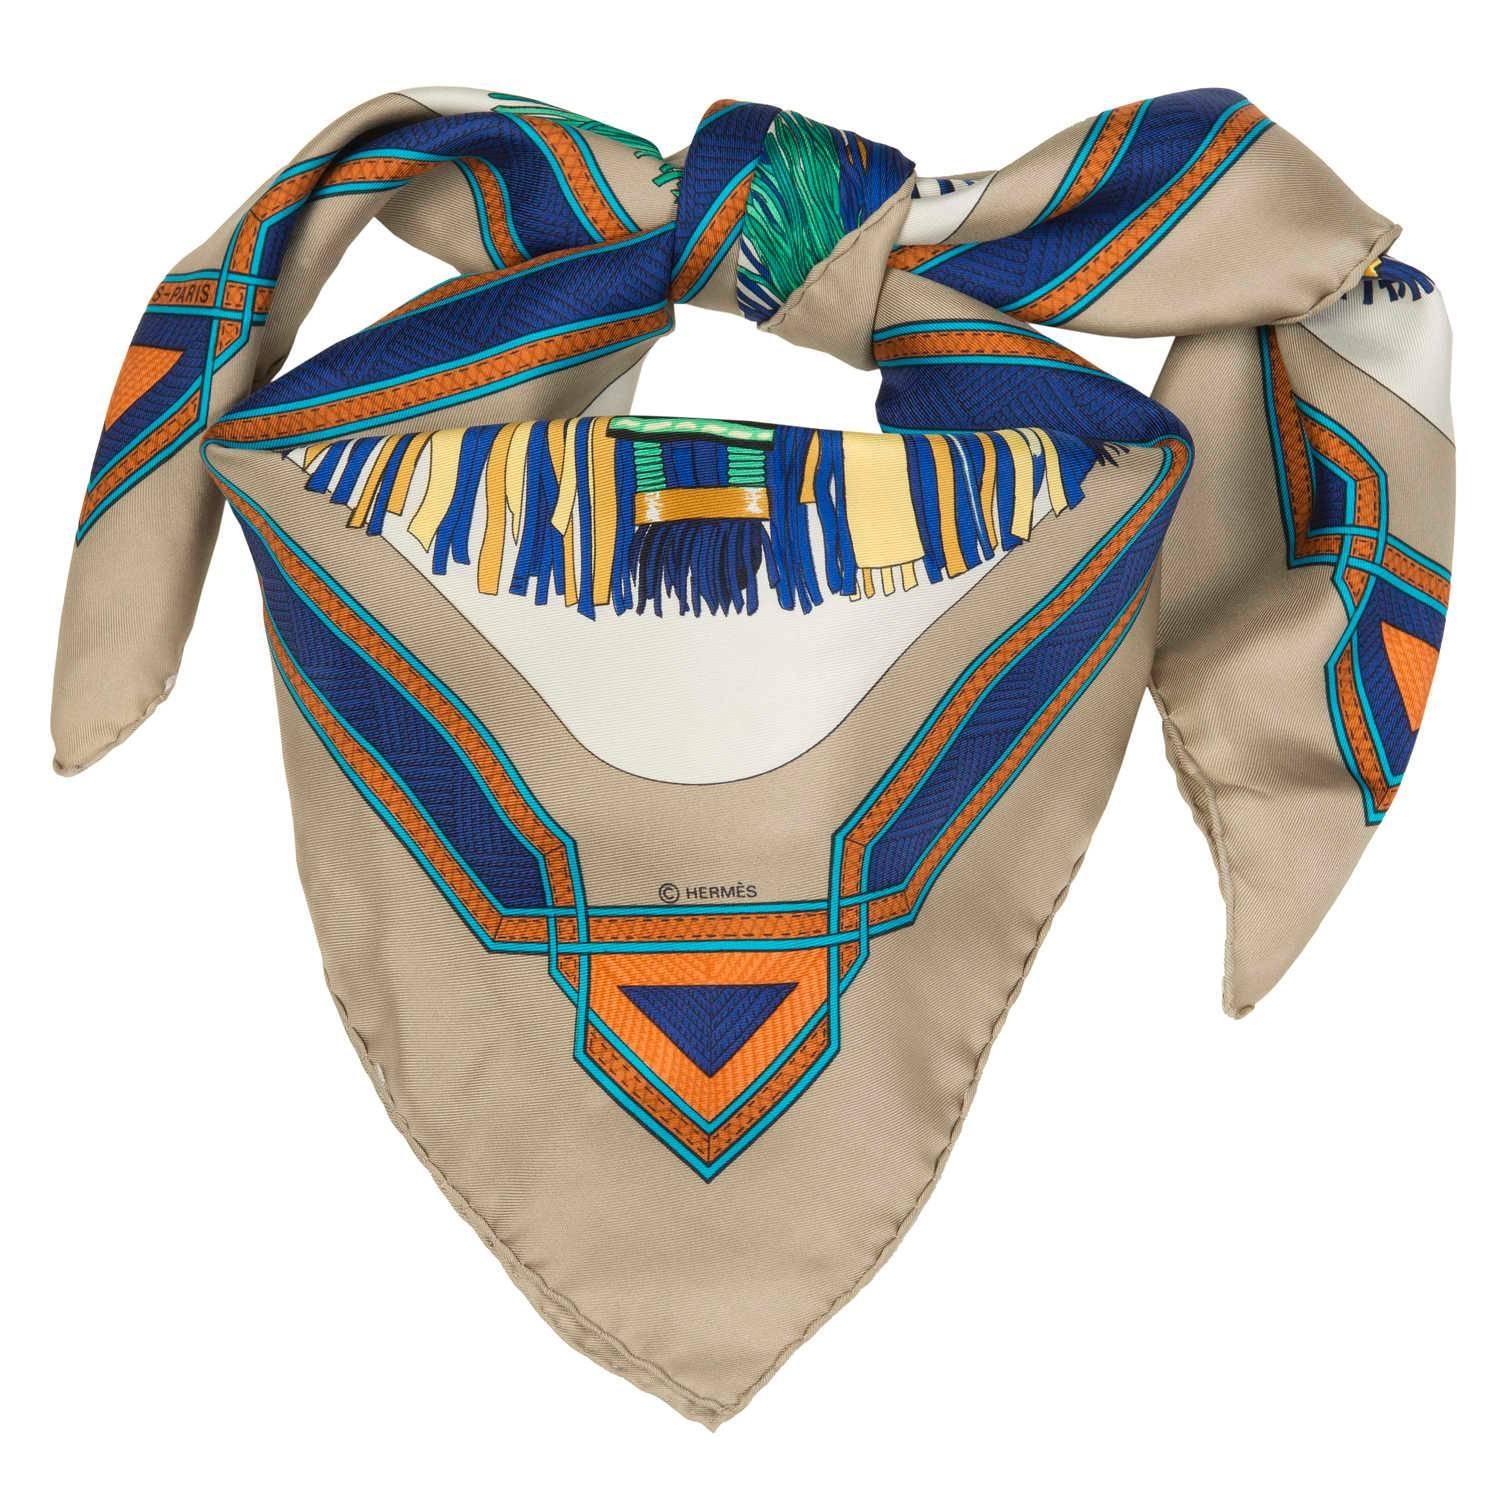 A rare & beautiful vintage Hermes scarf - 'Cuirs du Desert'. The scarf designed by Francoise de la Perriere in 1988, depicts the brightly coloured leather head decoration that the Bedouin tribesman used to adorn their Camels with.  Now highly sought